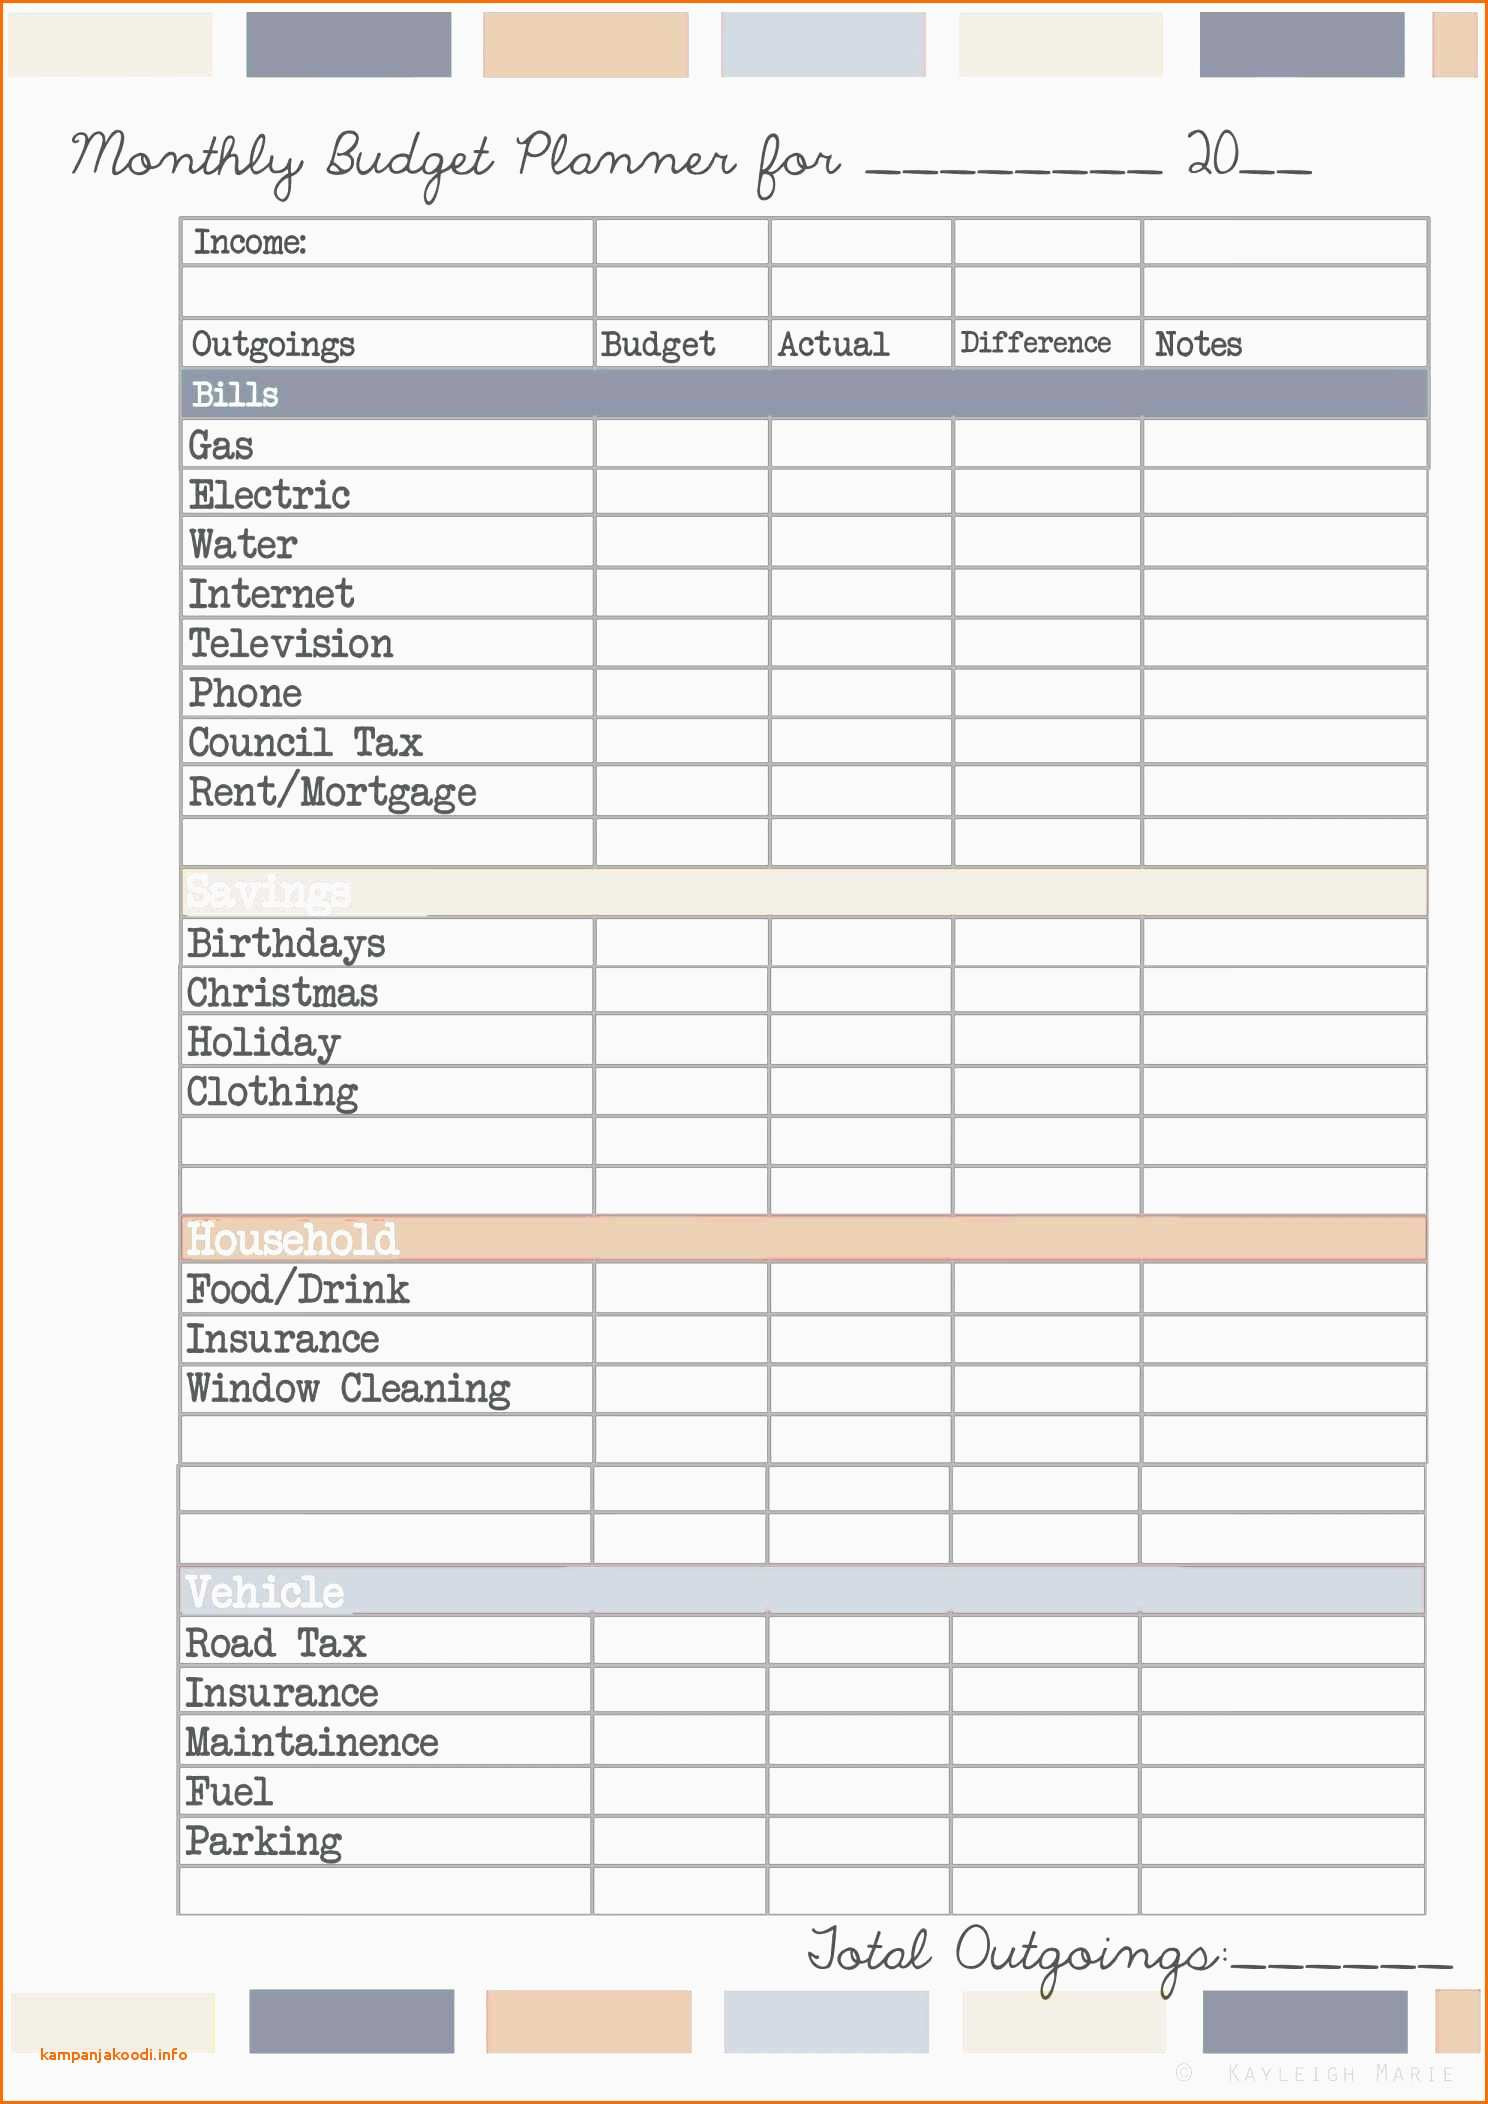 Awesome Kitchen Inventory Spreadsheet - MODELS FORM IDEAS Regarding Food Pantry Budget Template Within Food Pantry Budget Template